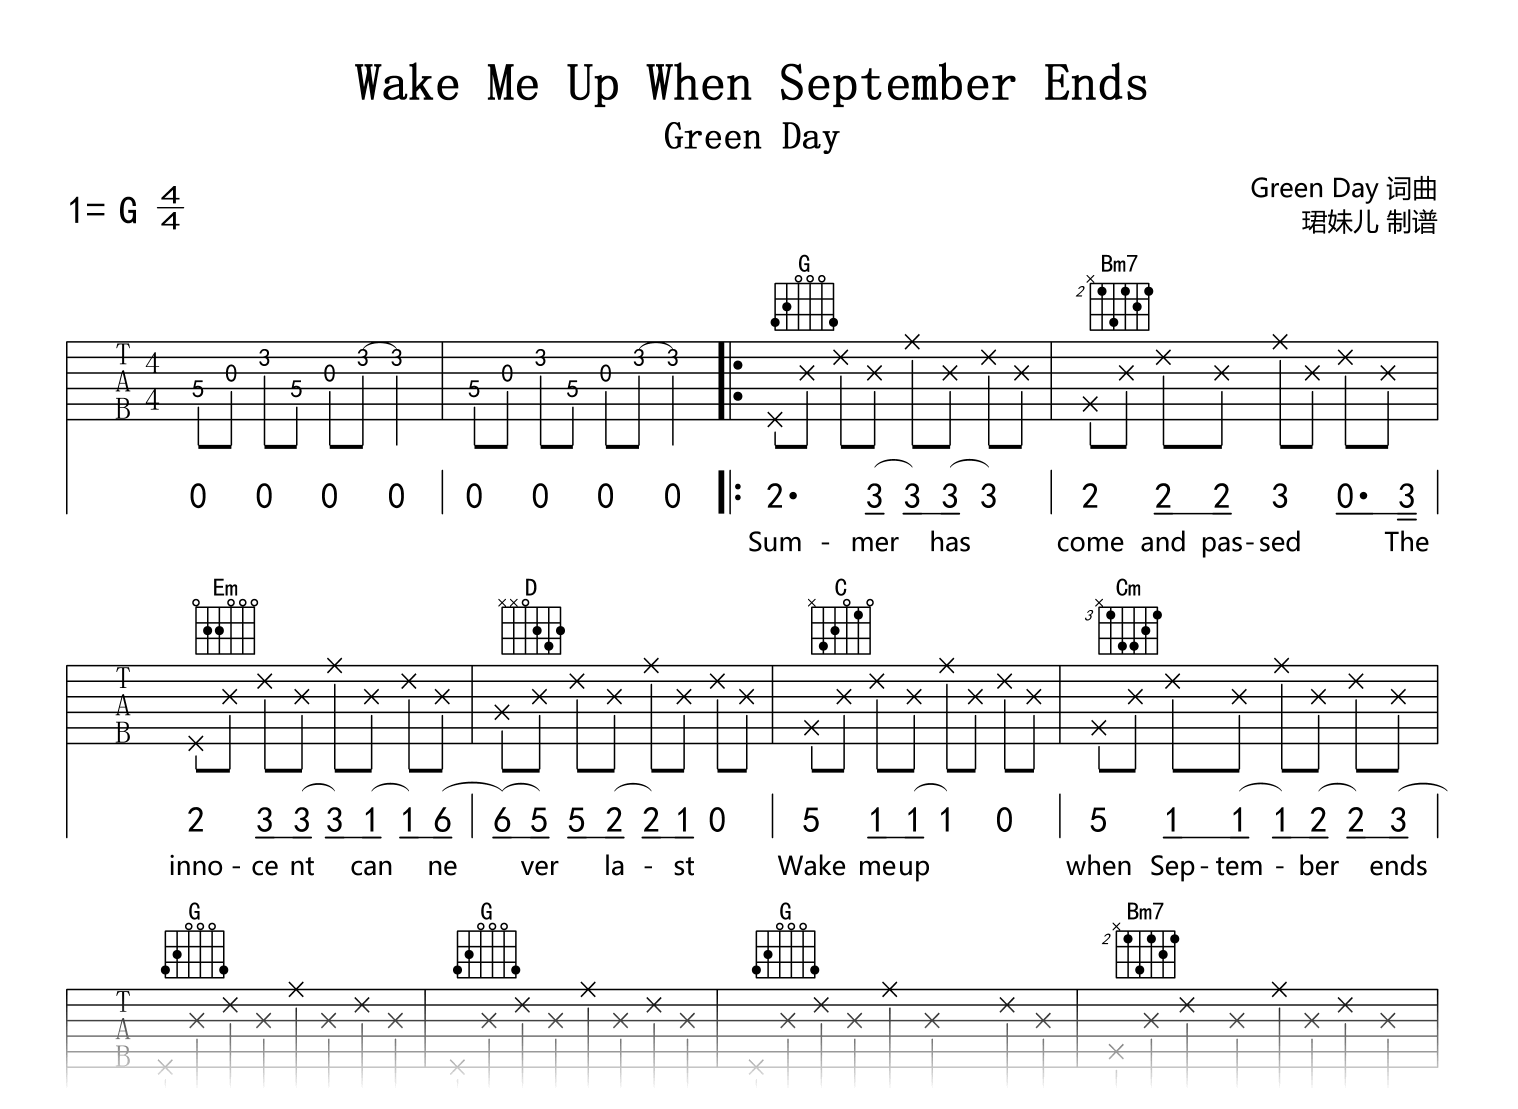 Wake Me Up When September Ends吉他谱_Green Day-吉他帮